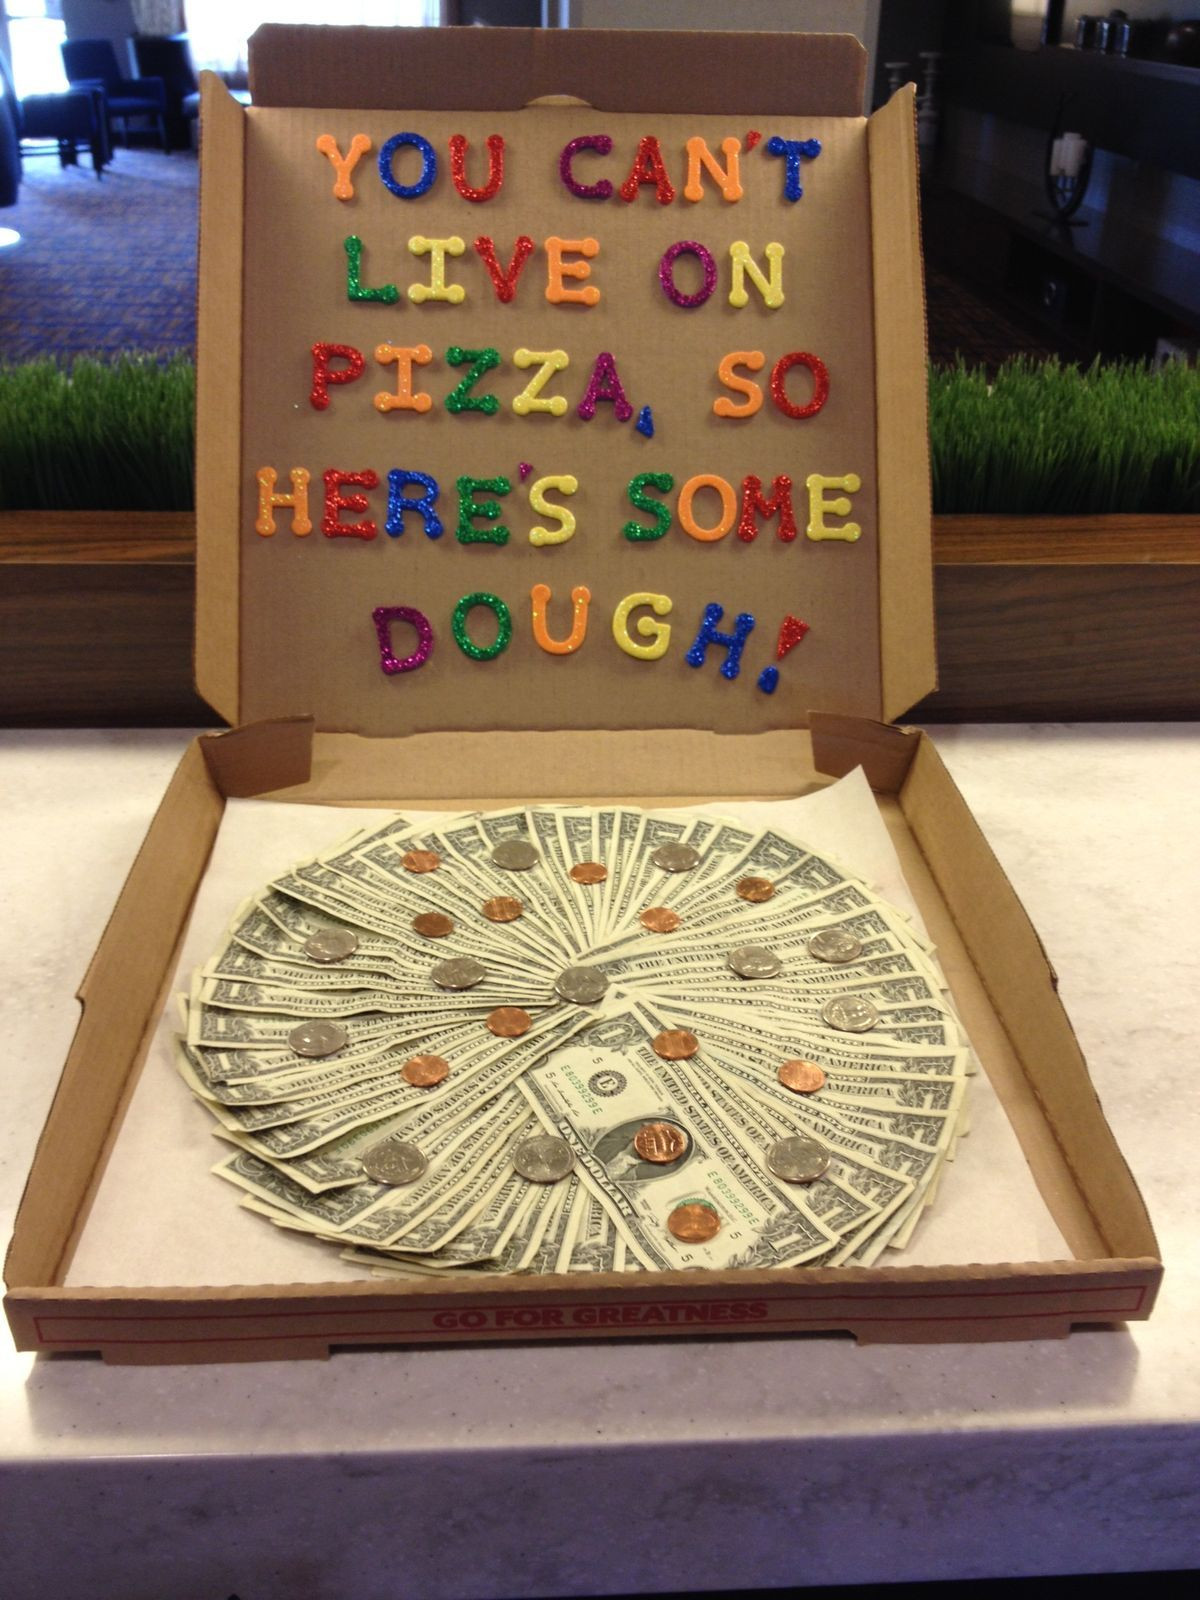 College Graduation Gift Ideas For Girlfriend
 You can t live on pizza so here s some dough fun way